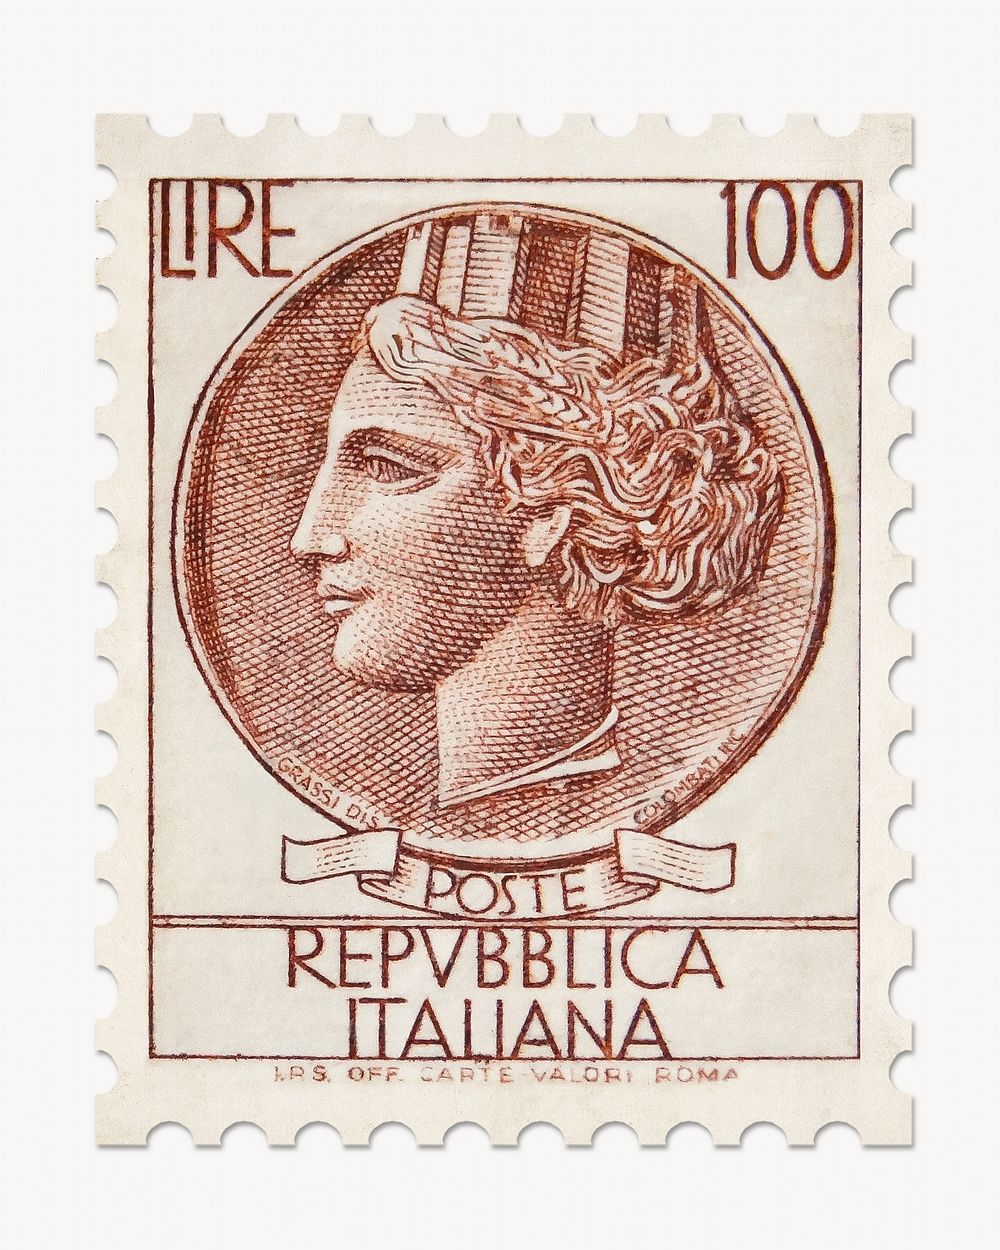 Vintage postage stamp from Italy